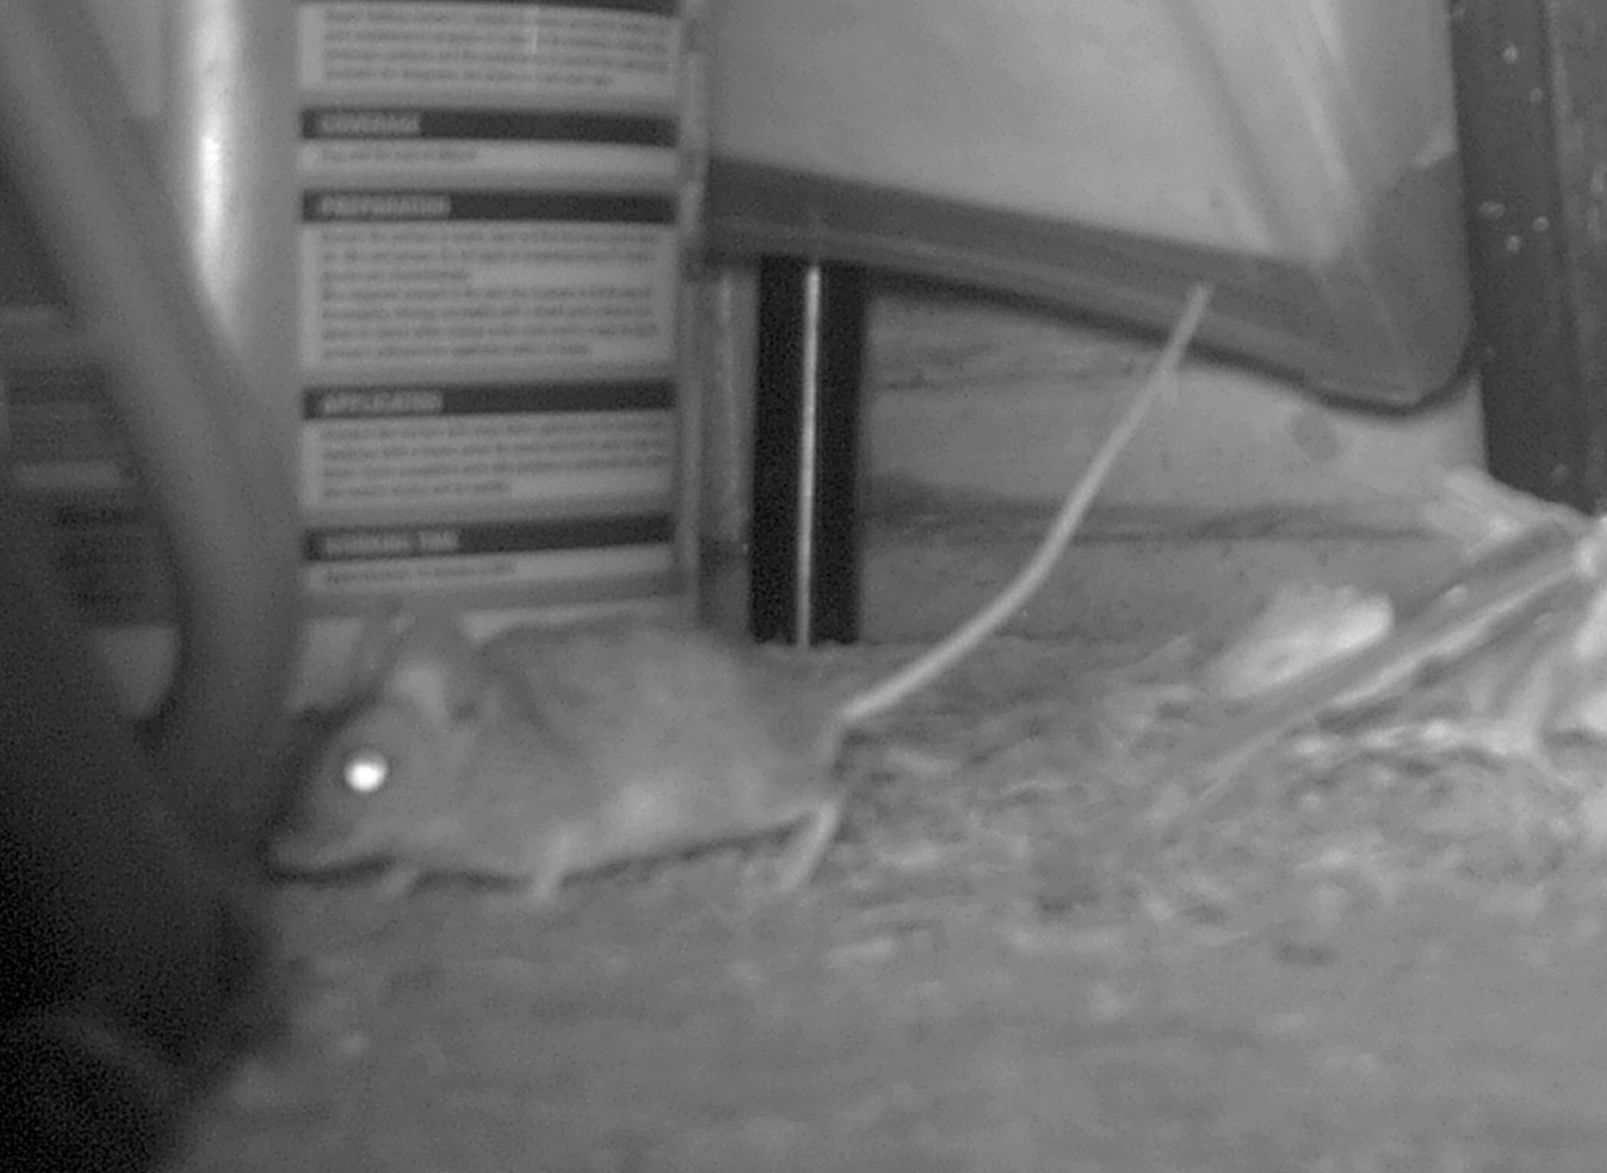  Wood Mouse    